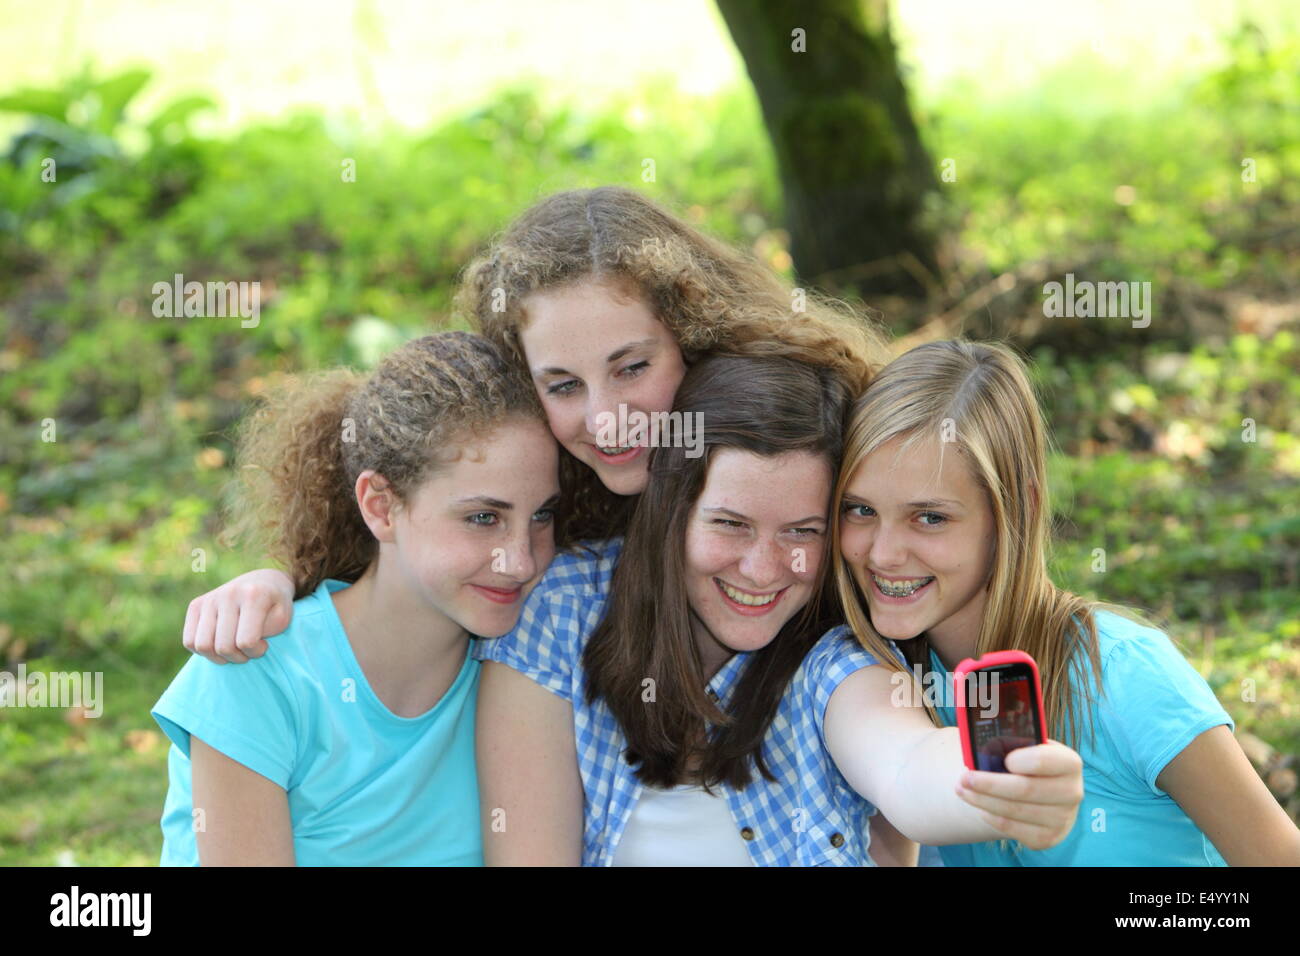 Laughing group of friends taking their photo Stock Photo